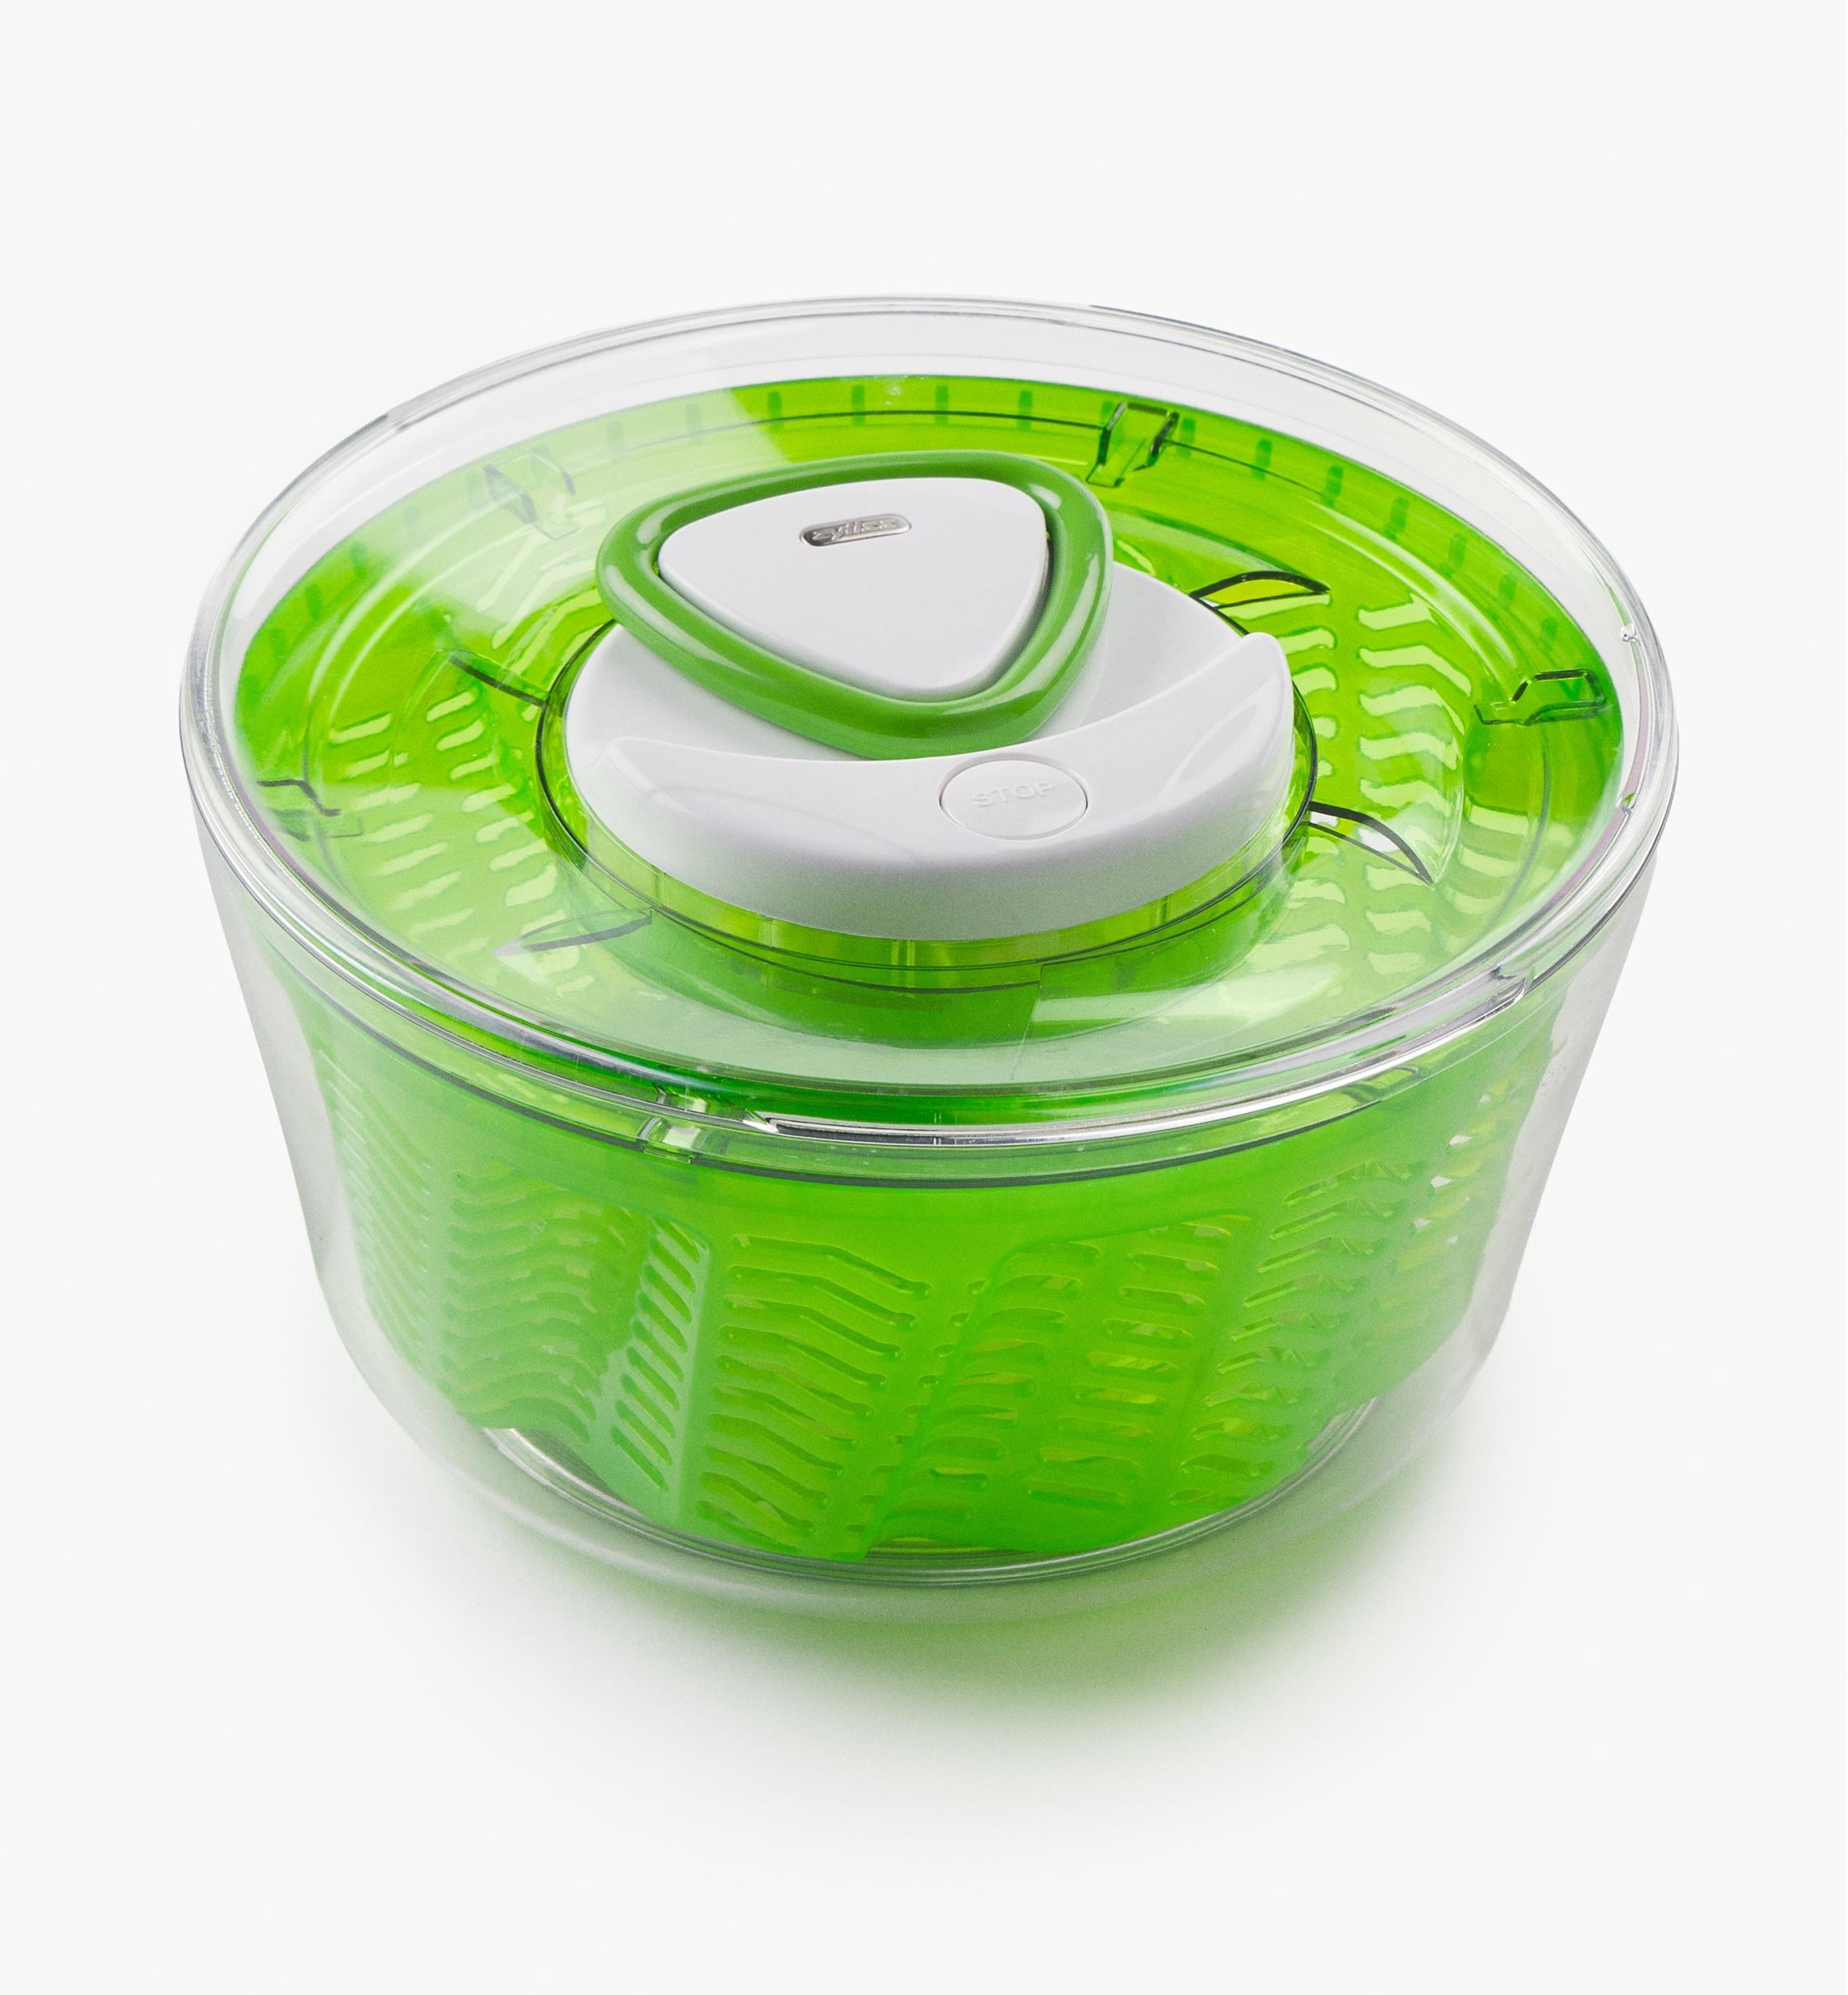 Zyliss Easy Spin Salad Spinner with Lid Handle, Large, Green, BPA